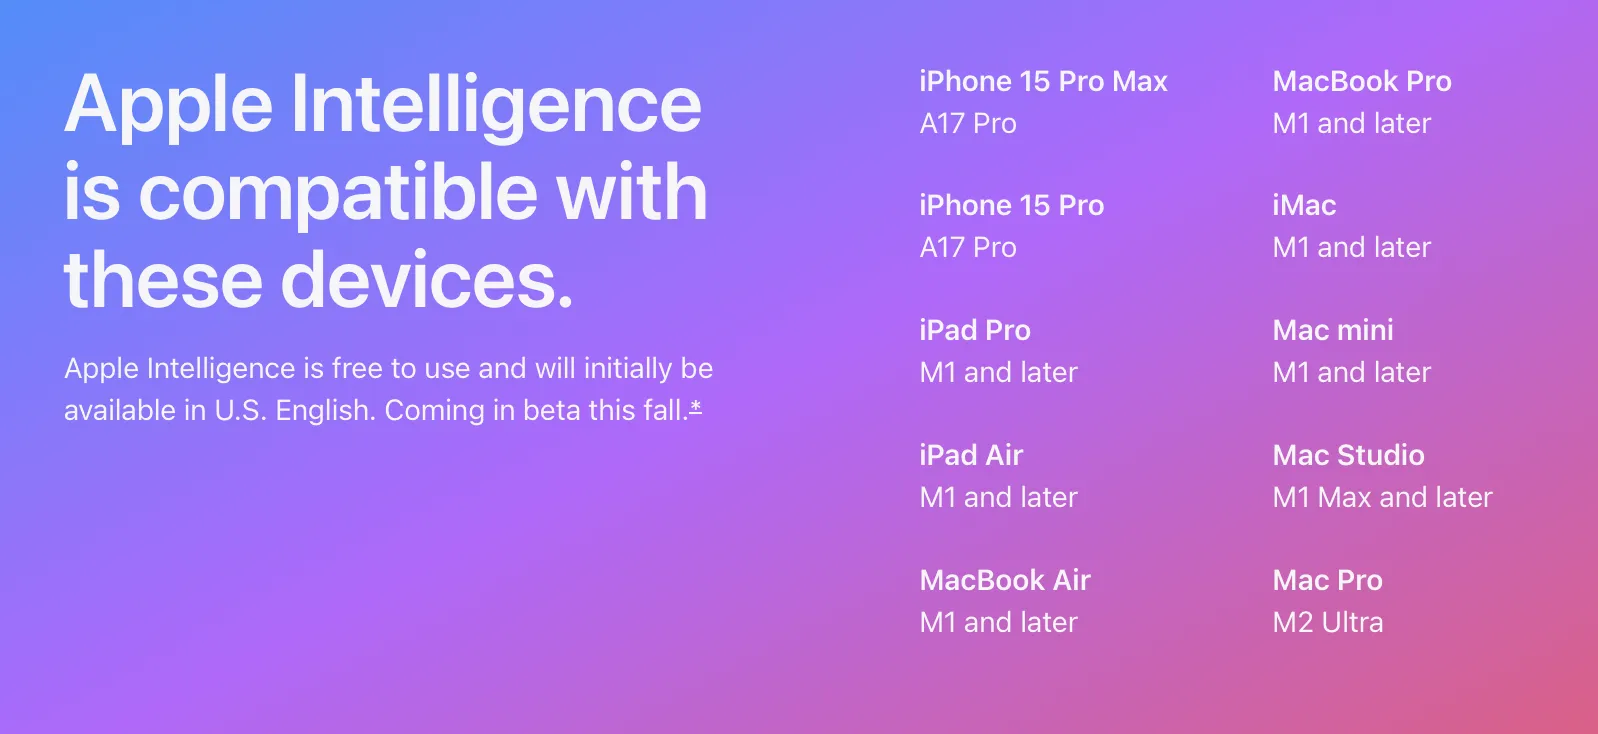 Apple Intelligence enabled devices